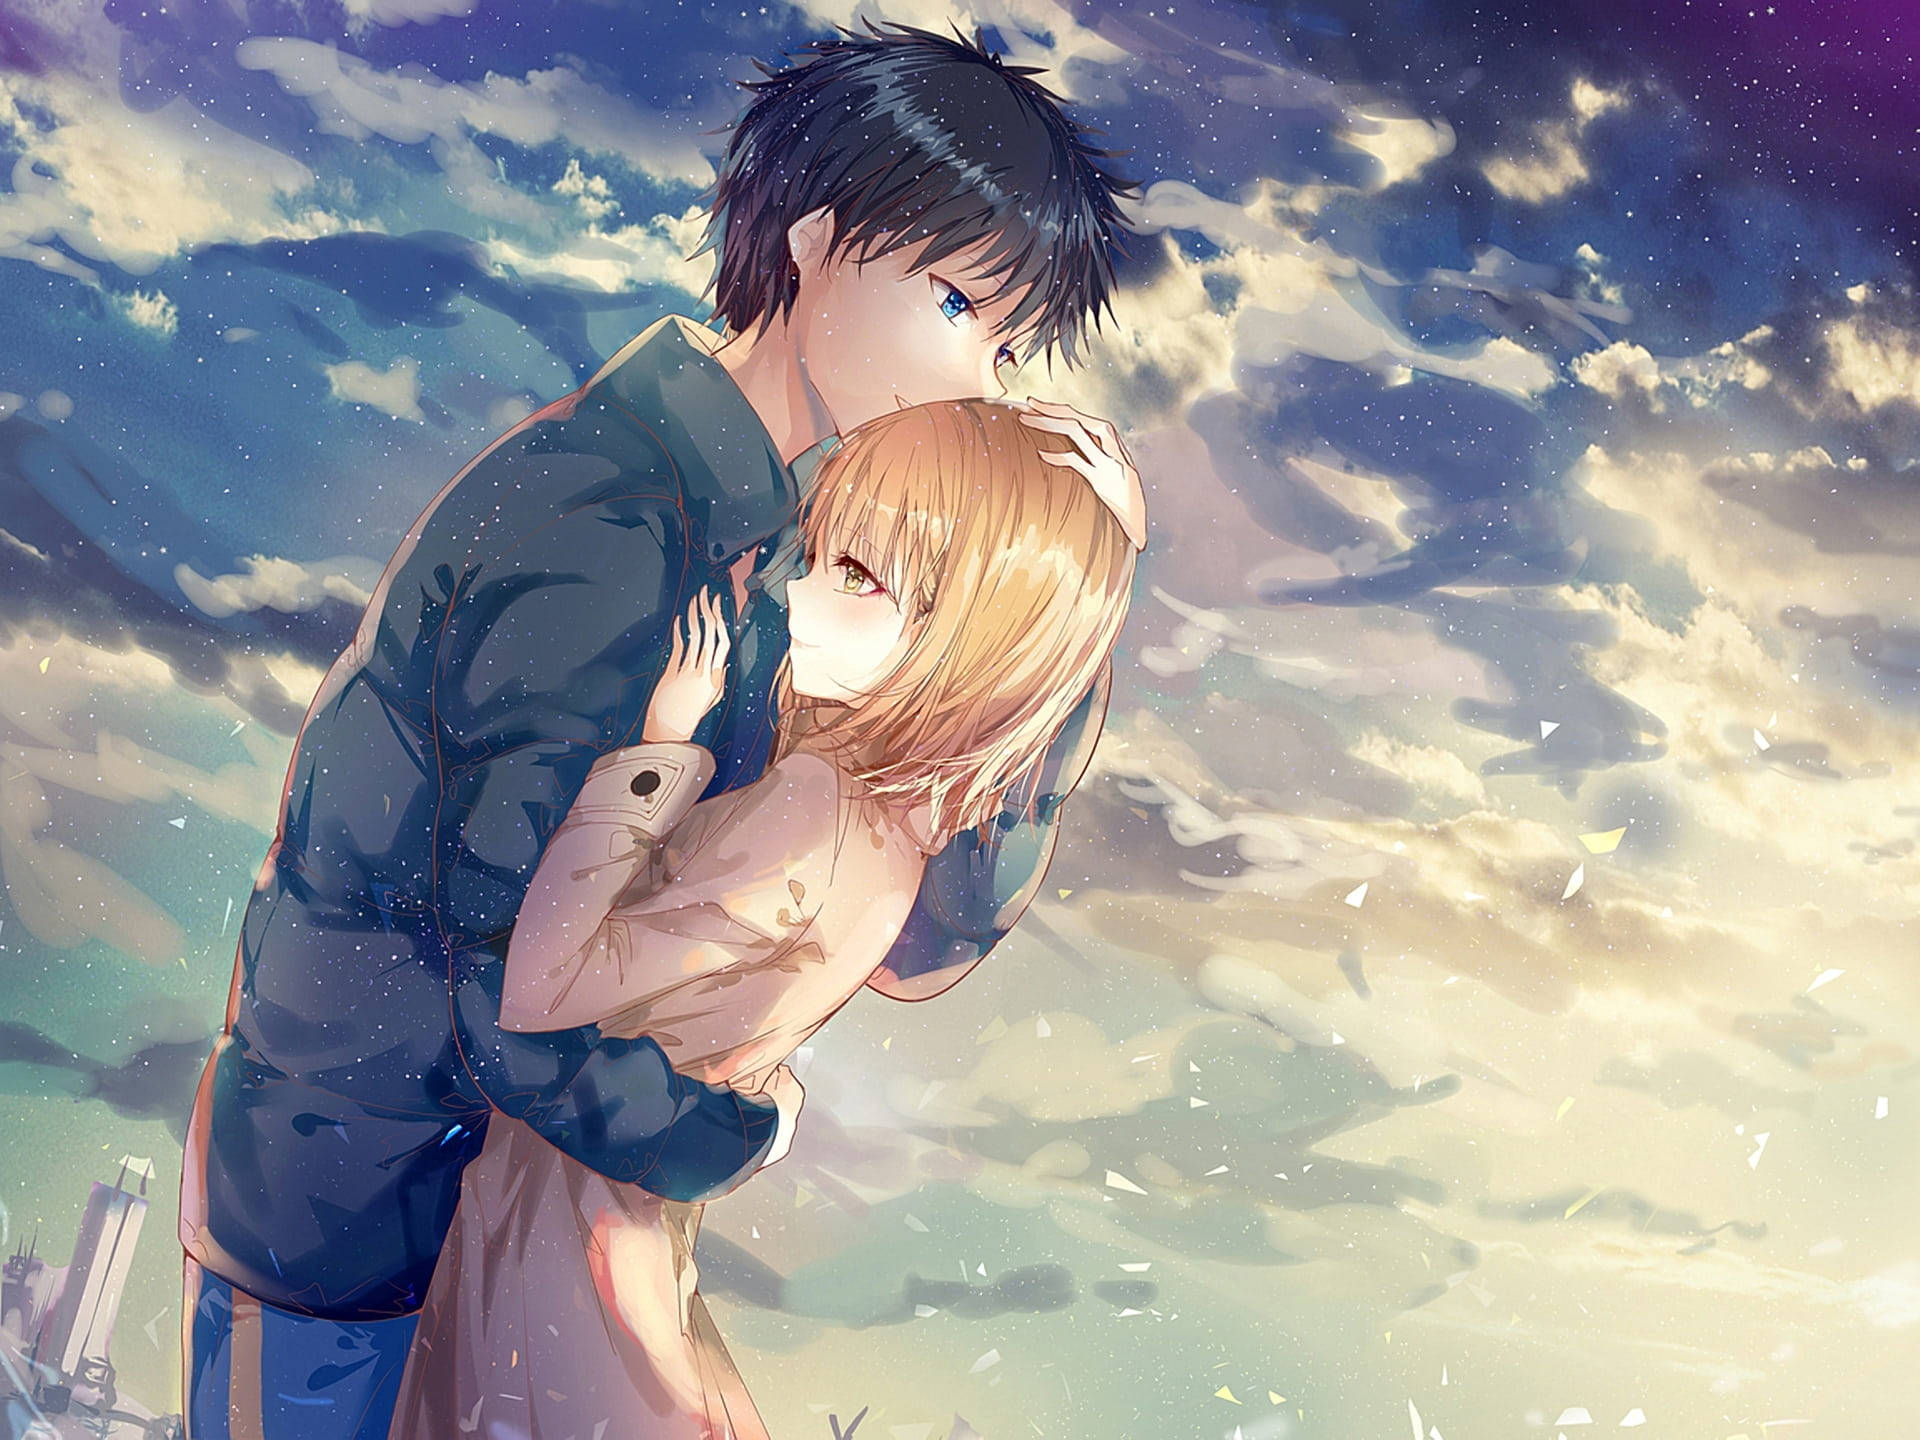 Cute Anime Couple Holding Each Other Background